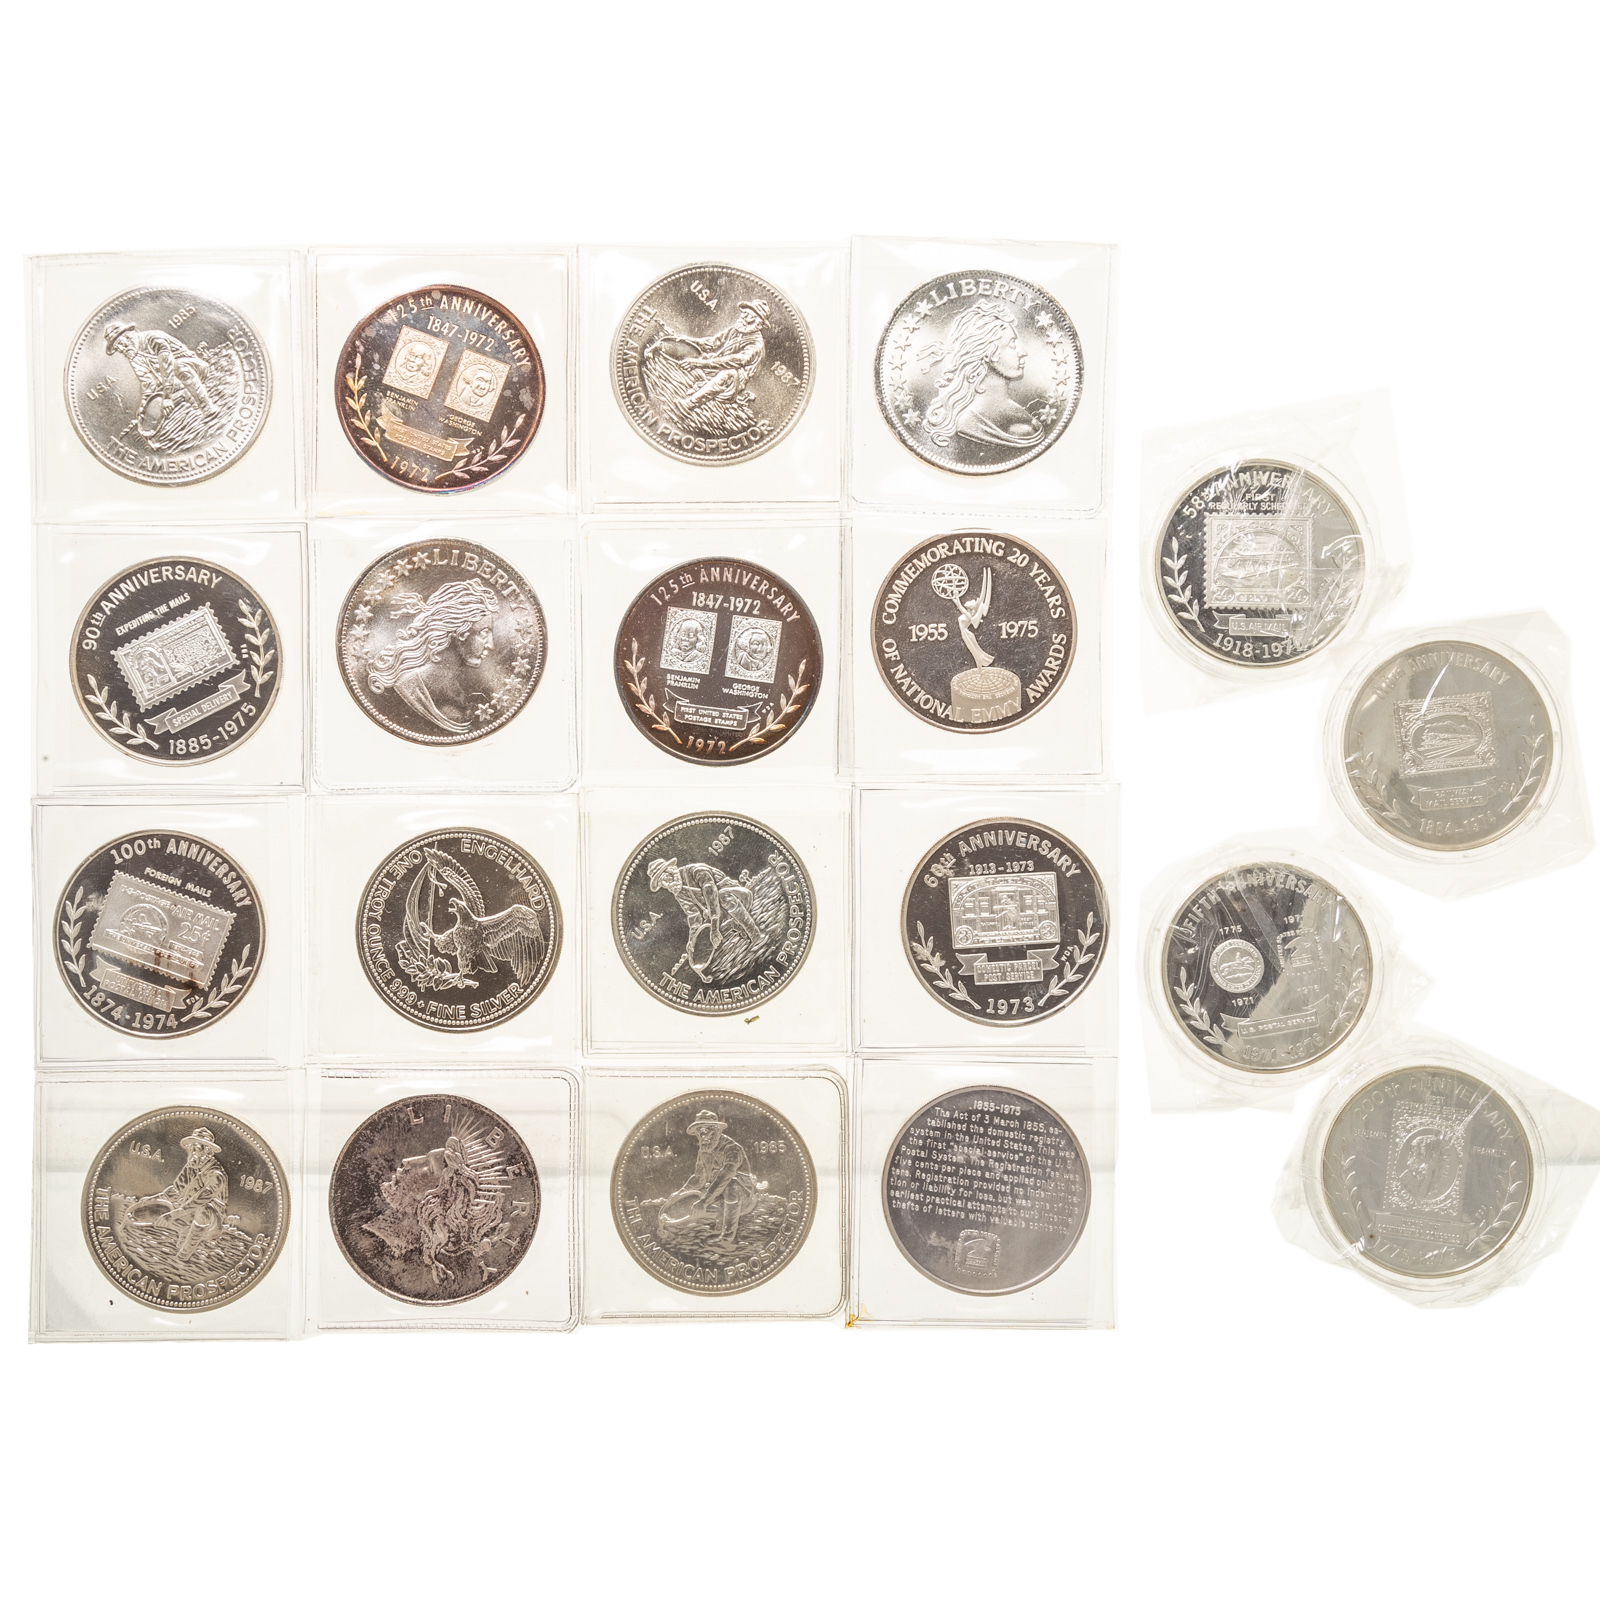 20- 1 OUNCE SILVER ROUNDS OF VARIOUS